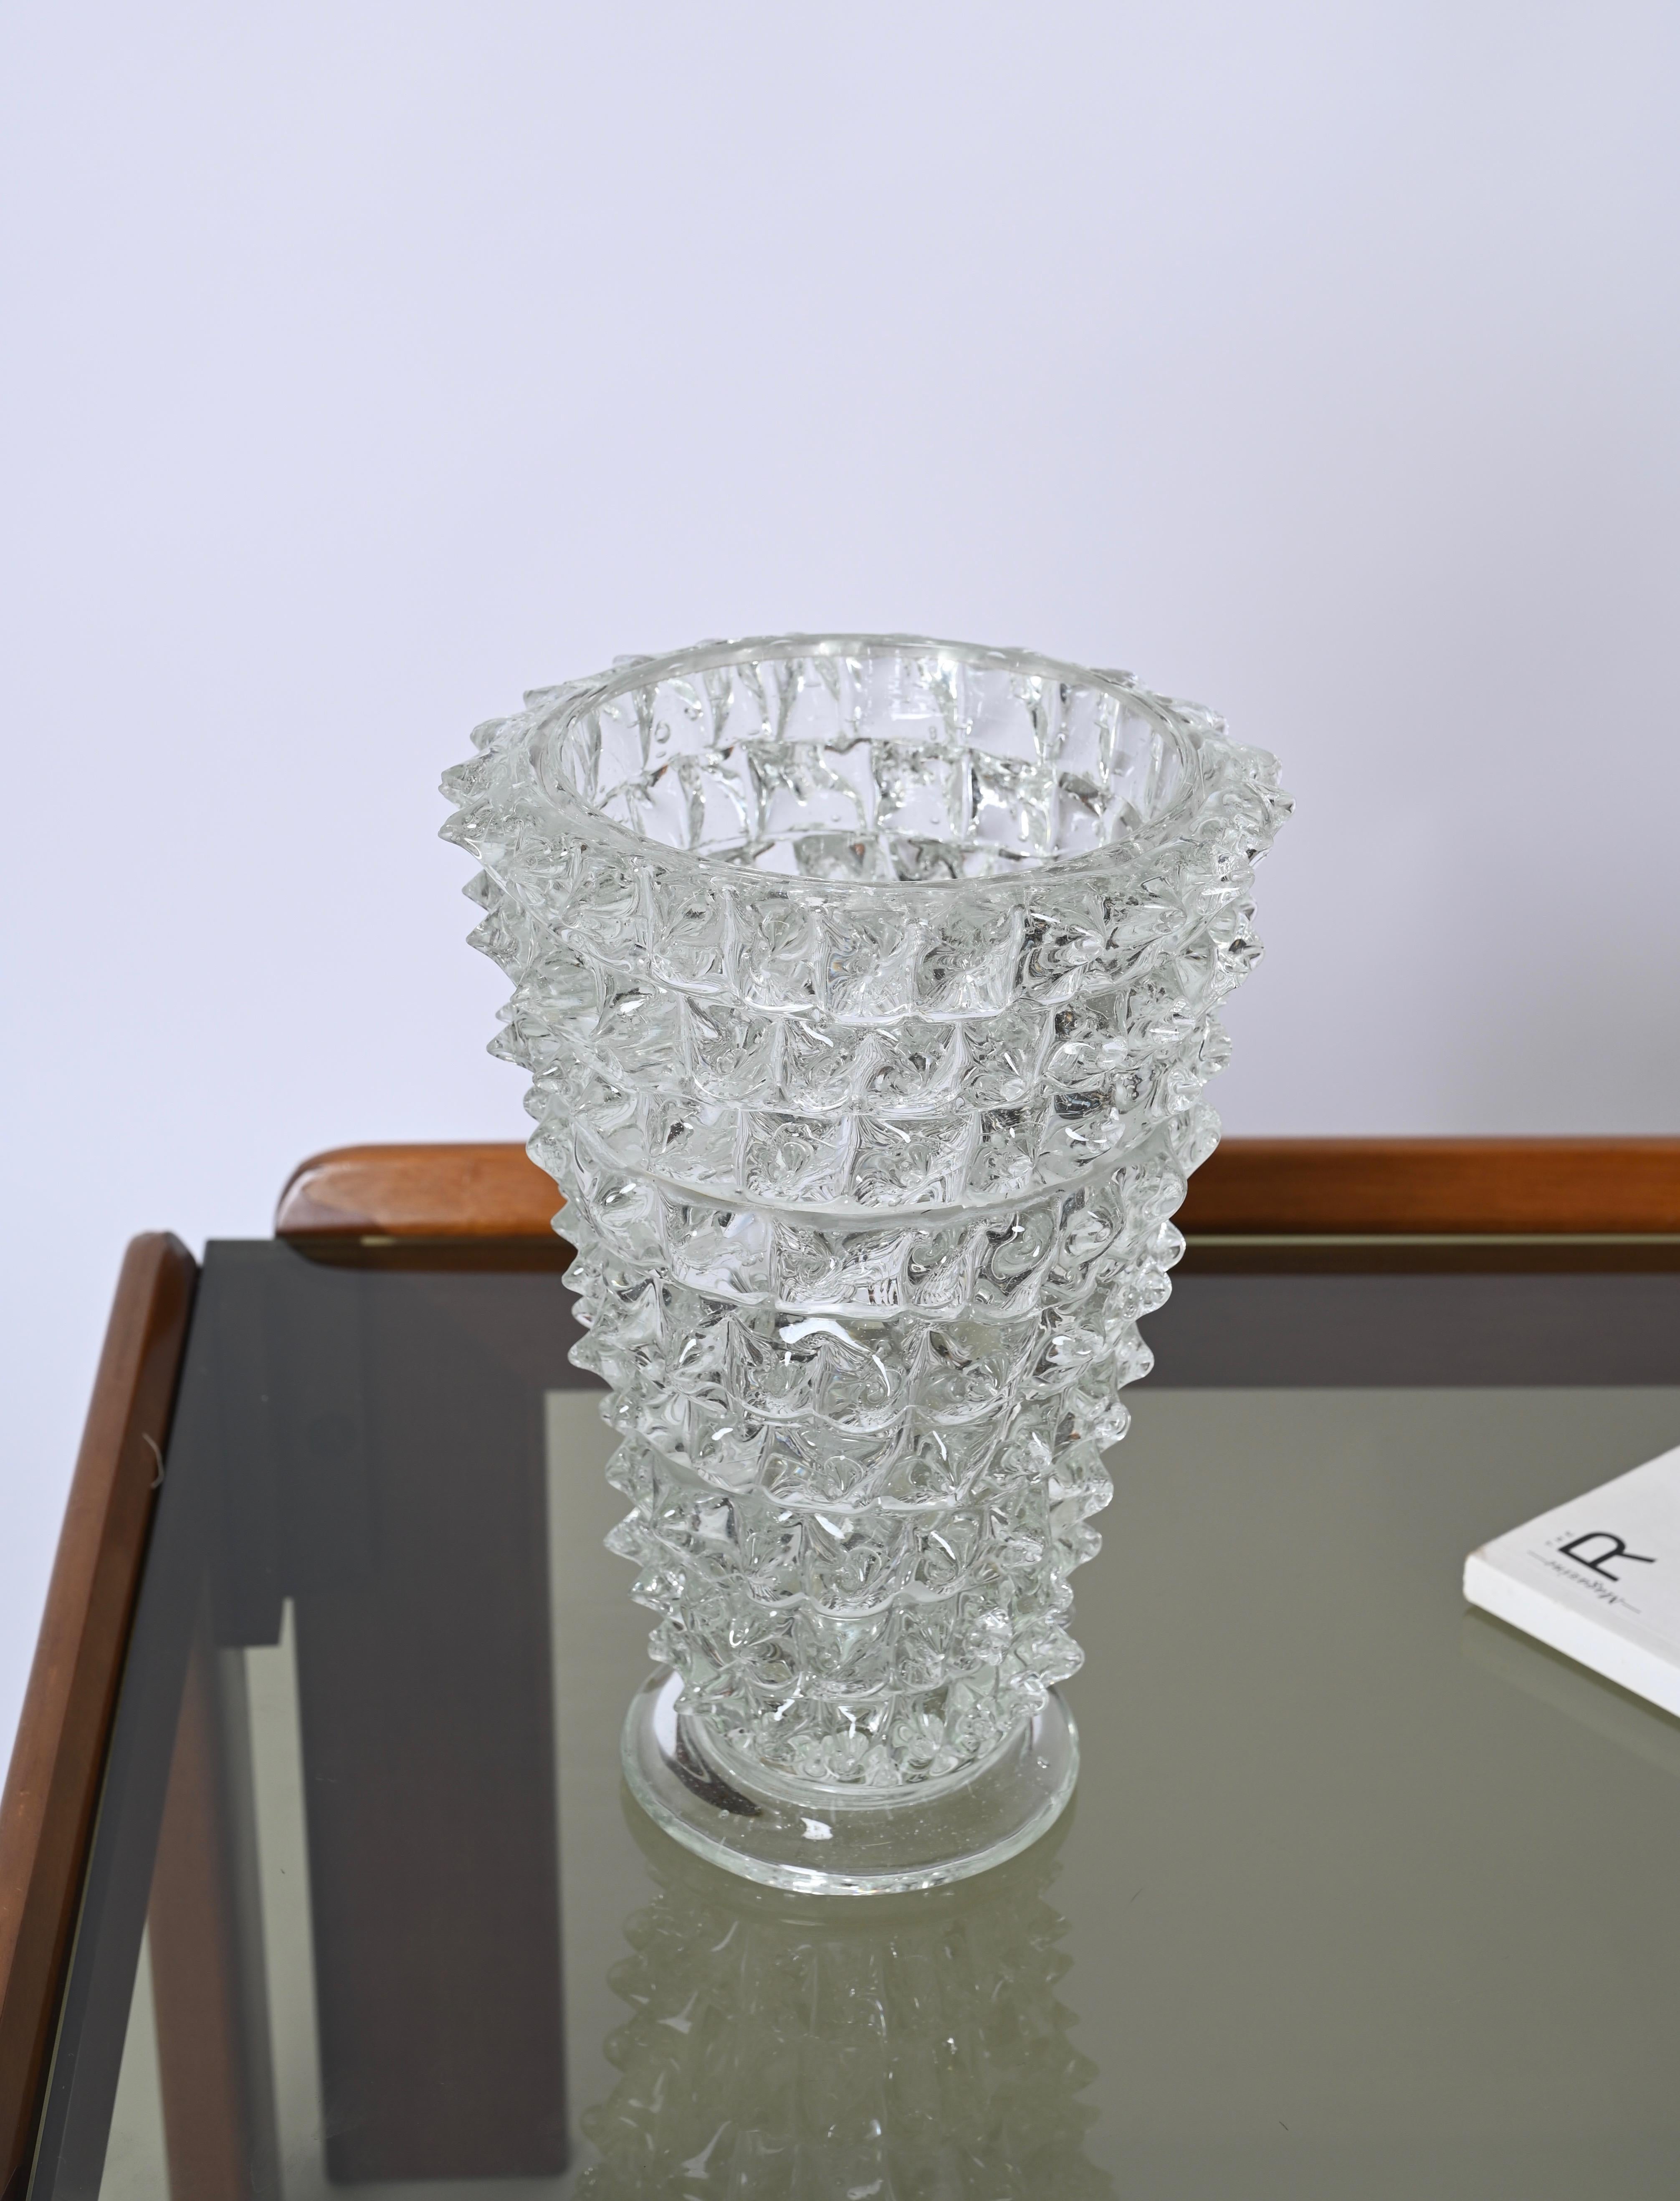 Fantastic large mouth-blown rostrato crystal Murano glass vase. This stunning piece was realized during the 1940s in Italy by Ercole Barovier for Barovier & Toso.

This gorgeous decorative vase is fantastic thanks to the incredible workmanship of